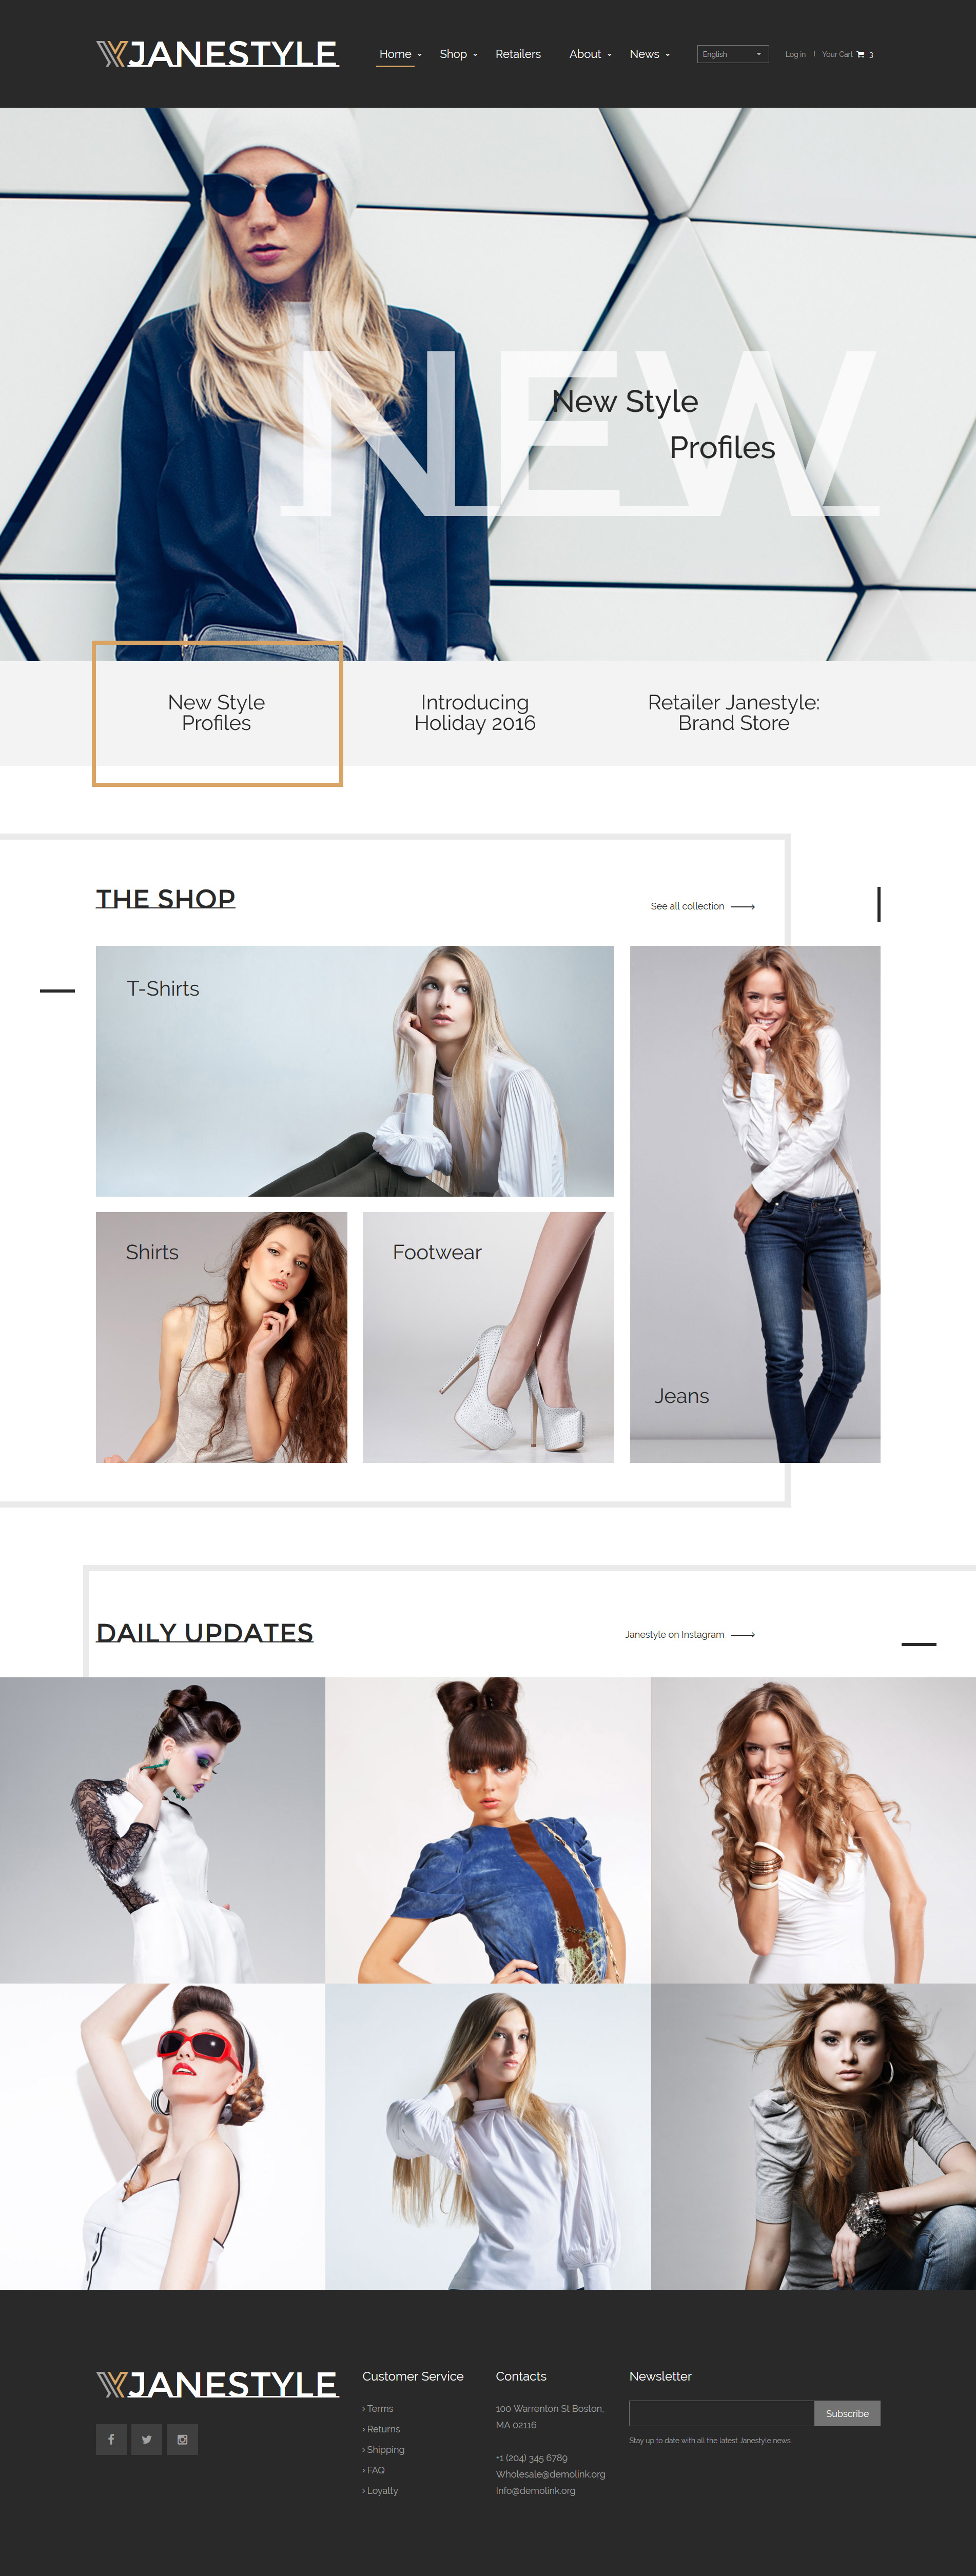 JaneStyle - Fashion Website Template